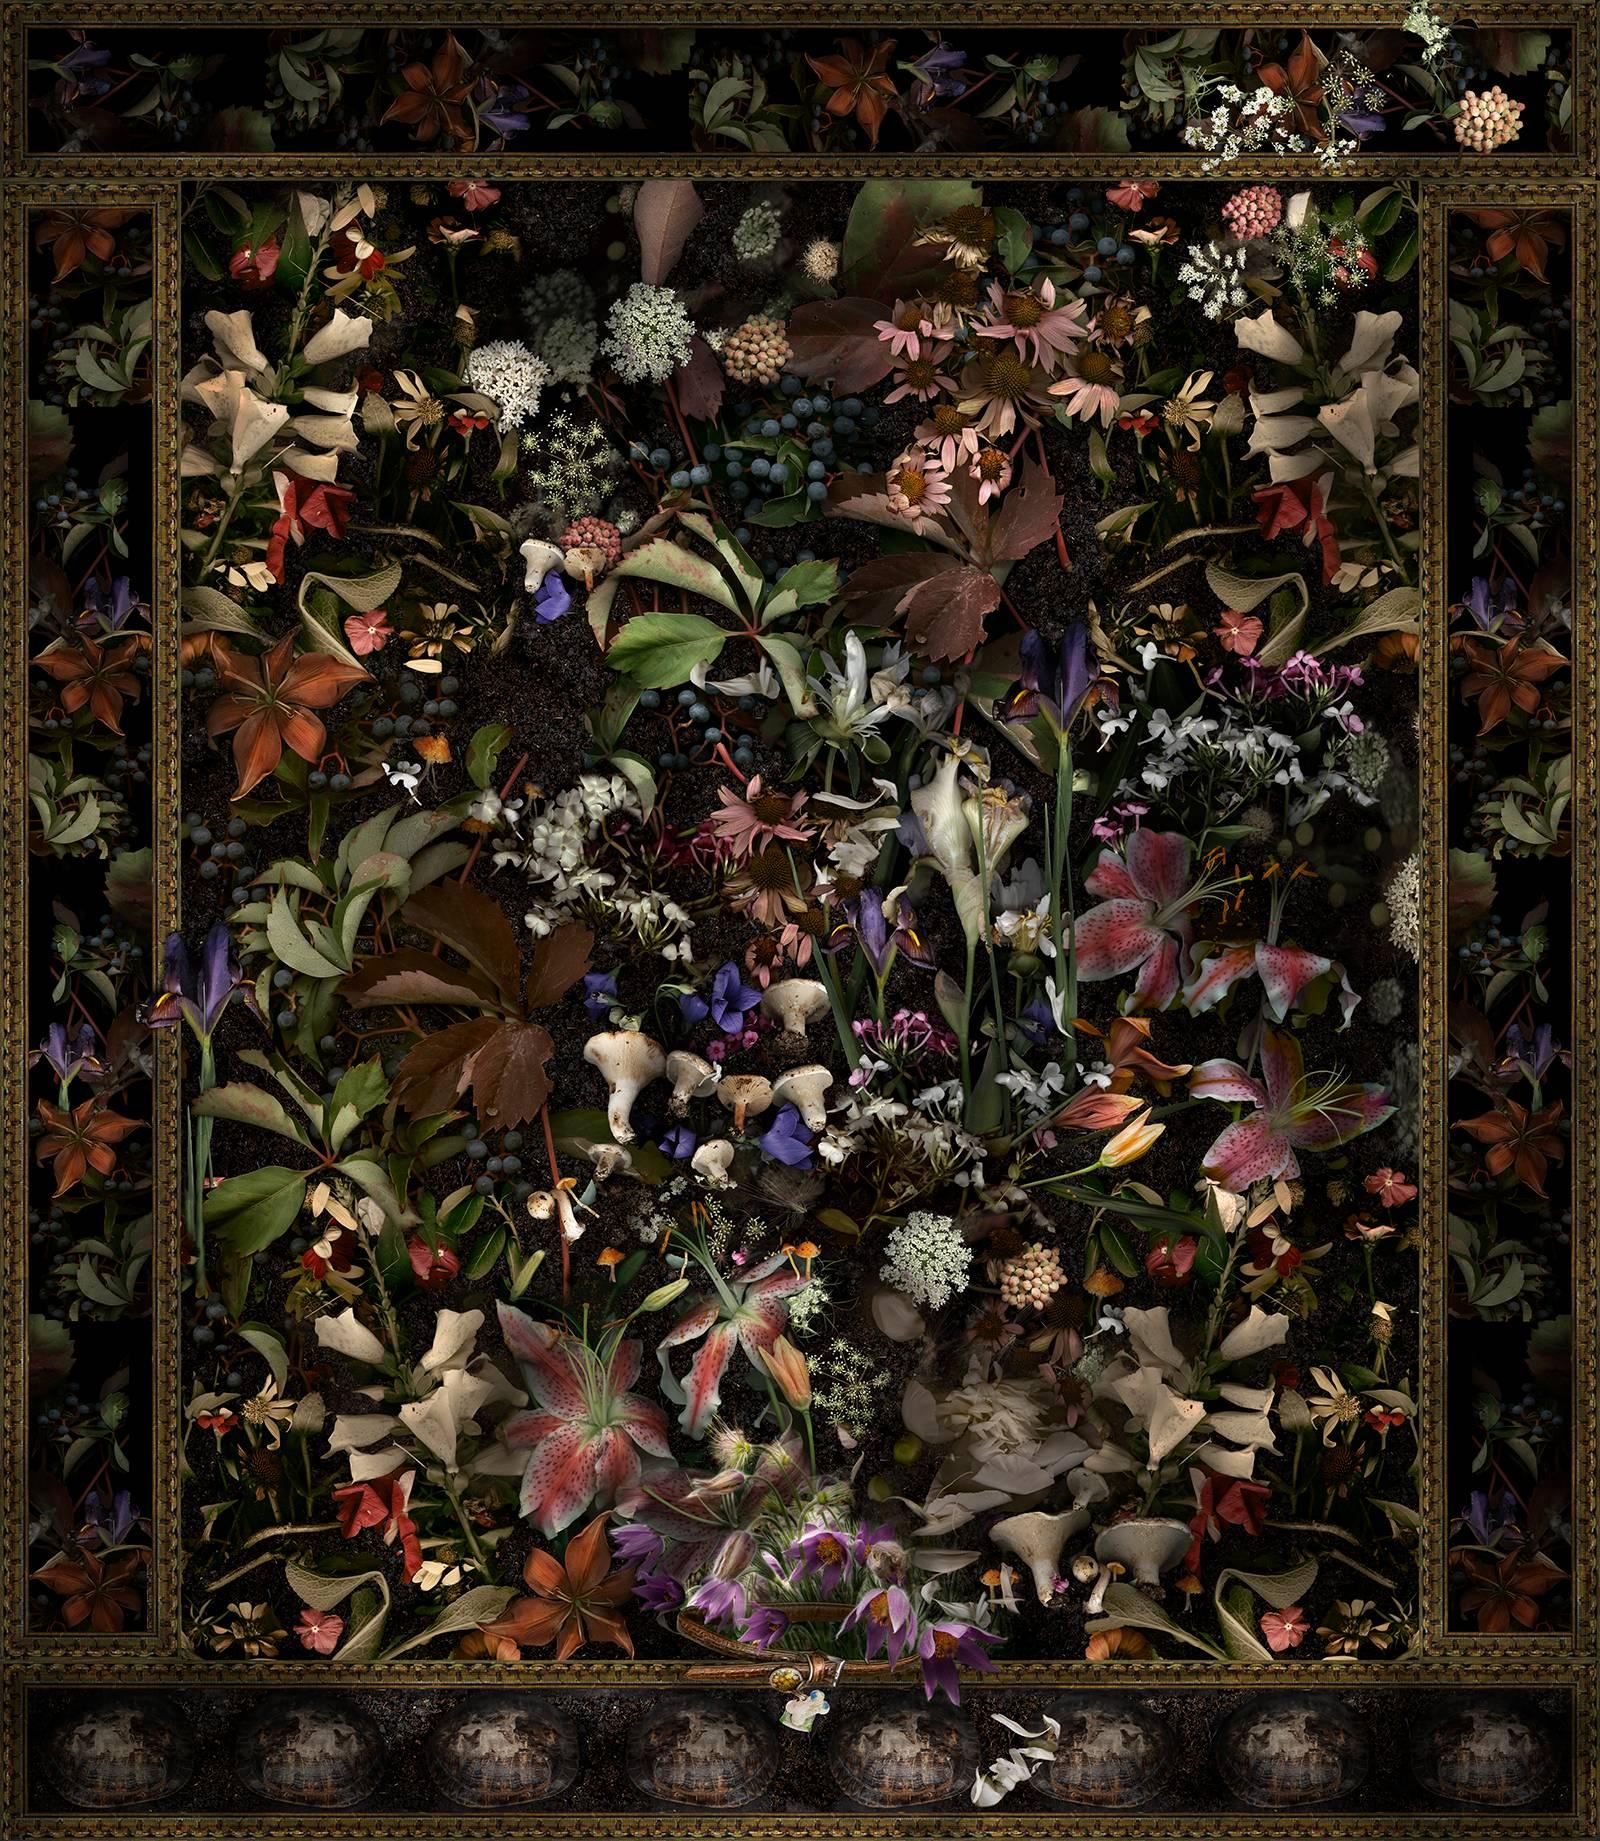 Lisa A. Frank Color Photograph - For Scout A, Very Good Dog: Modern Baroque Style Floral Still Life Digital Print